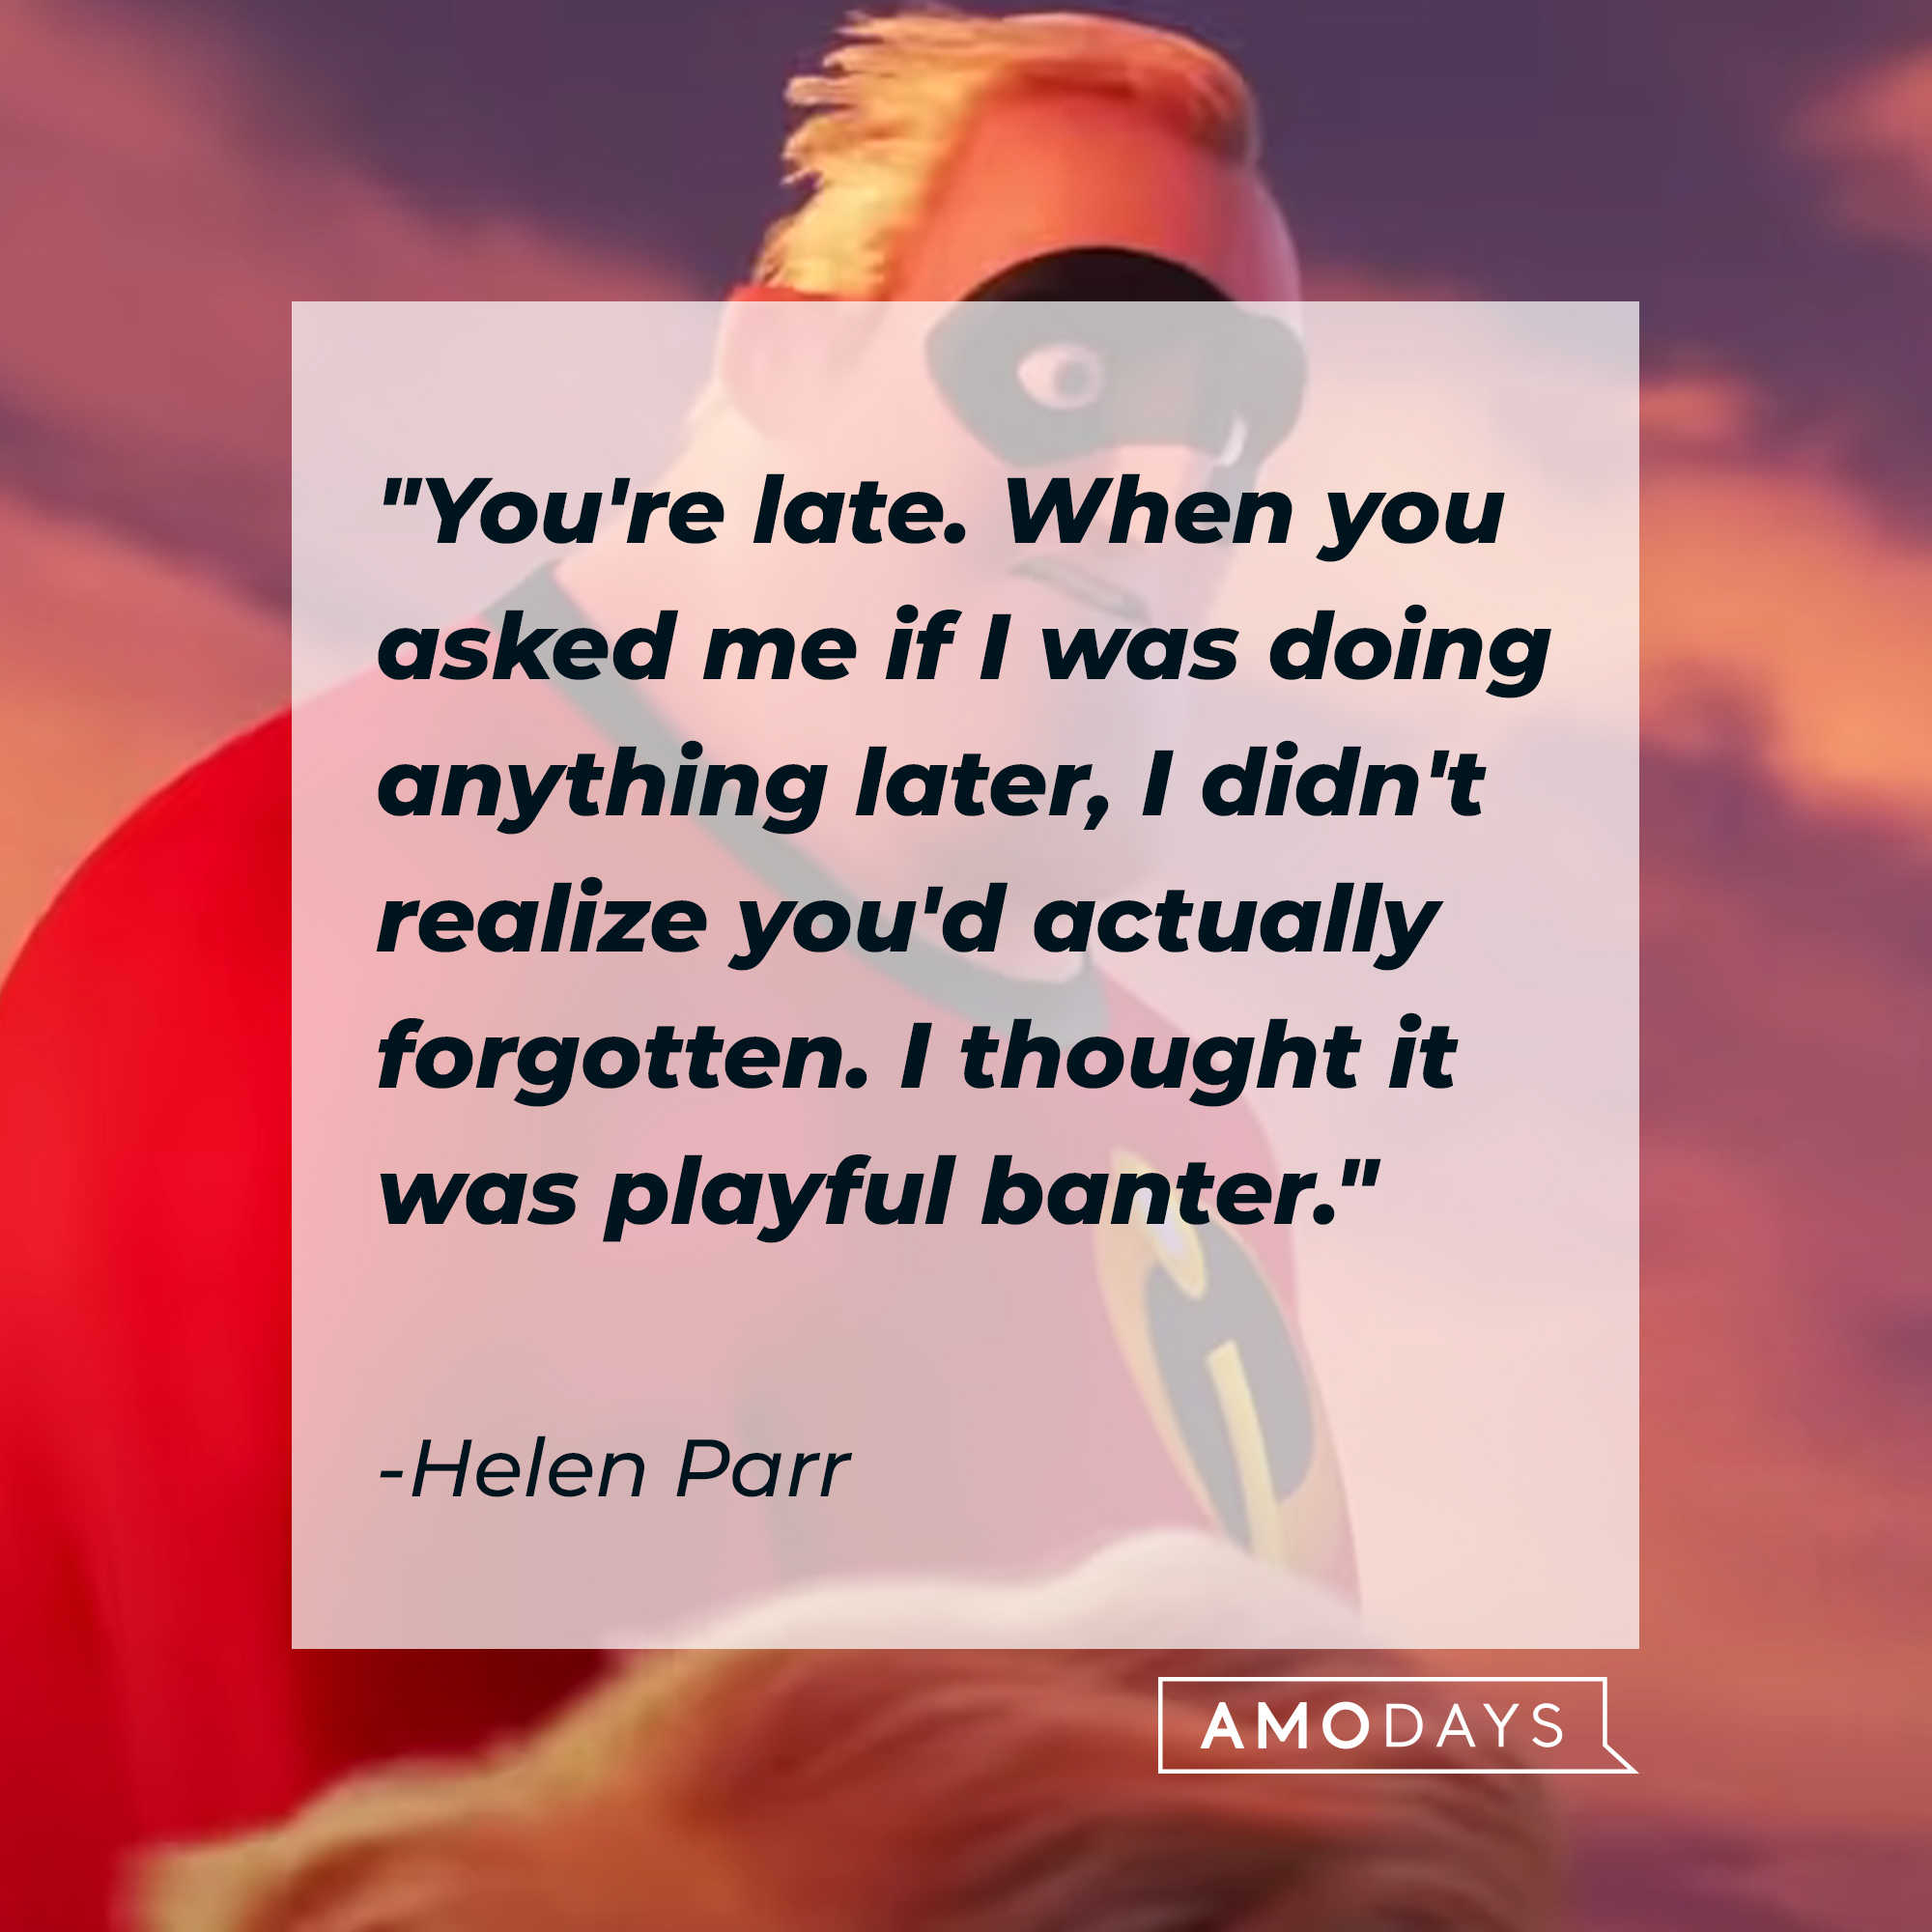 Robert Parr with Helen Parr's quote: "You're late. When you asked me if I was doing anything later, I didn't realize you'd actually forgotten. I thought it was playful banter." | Source: Youtube/pixar